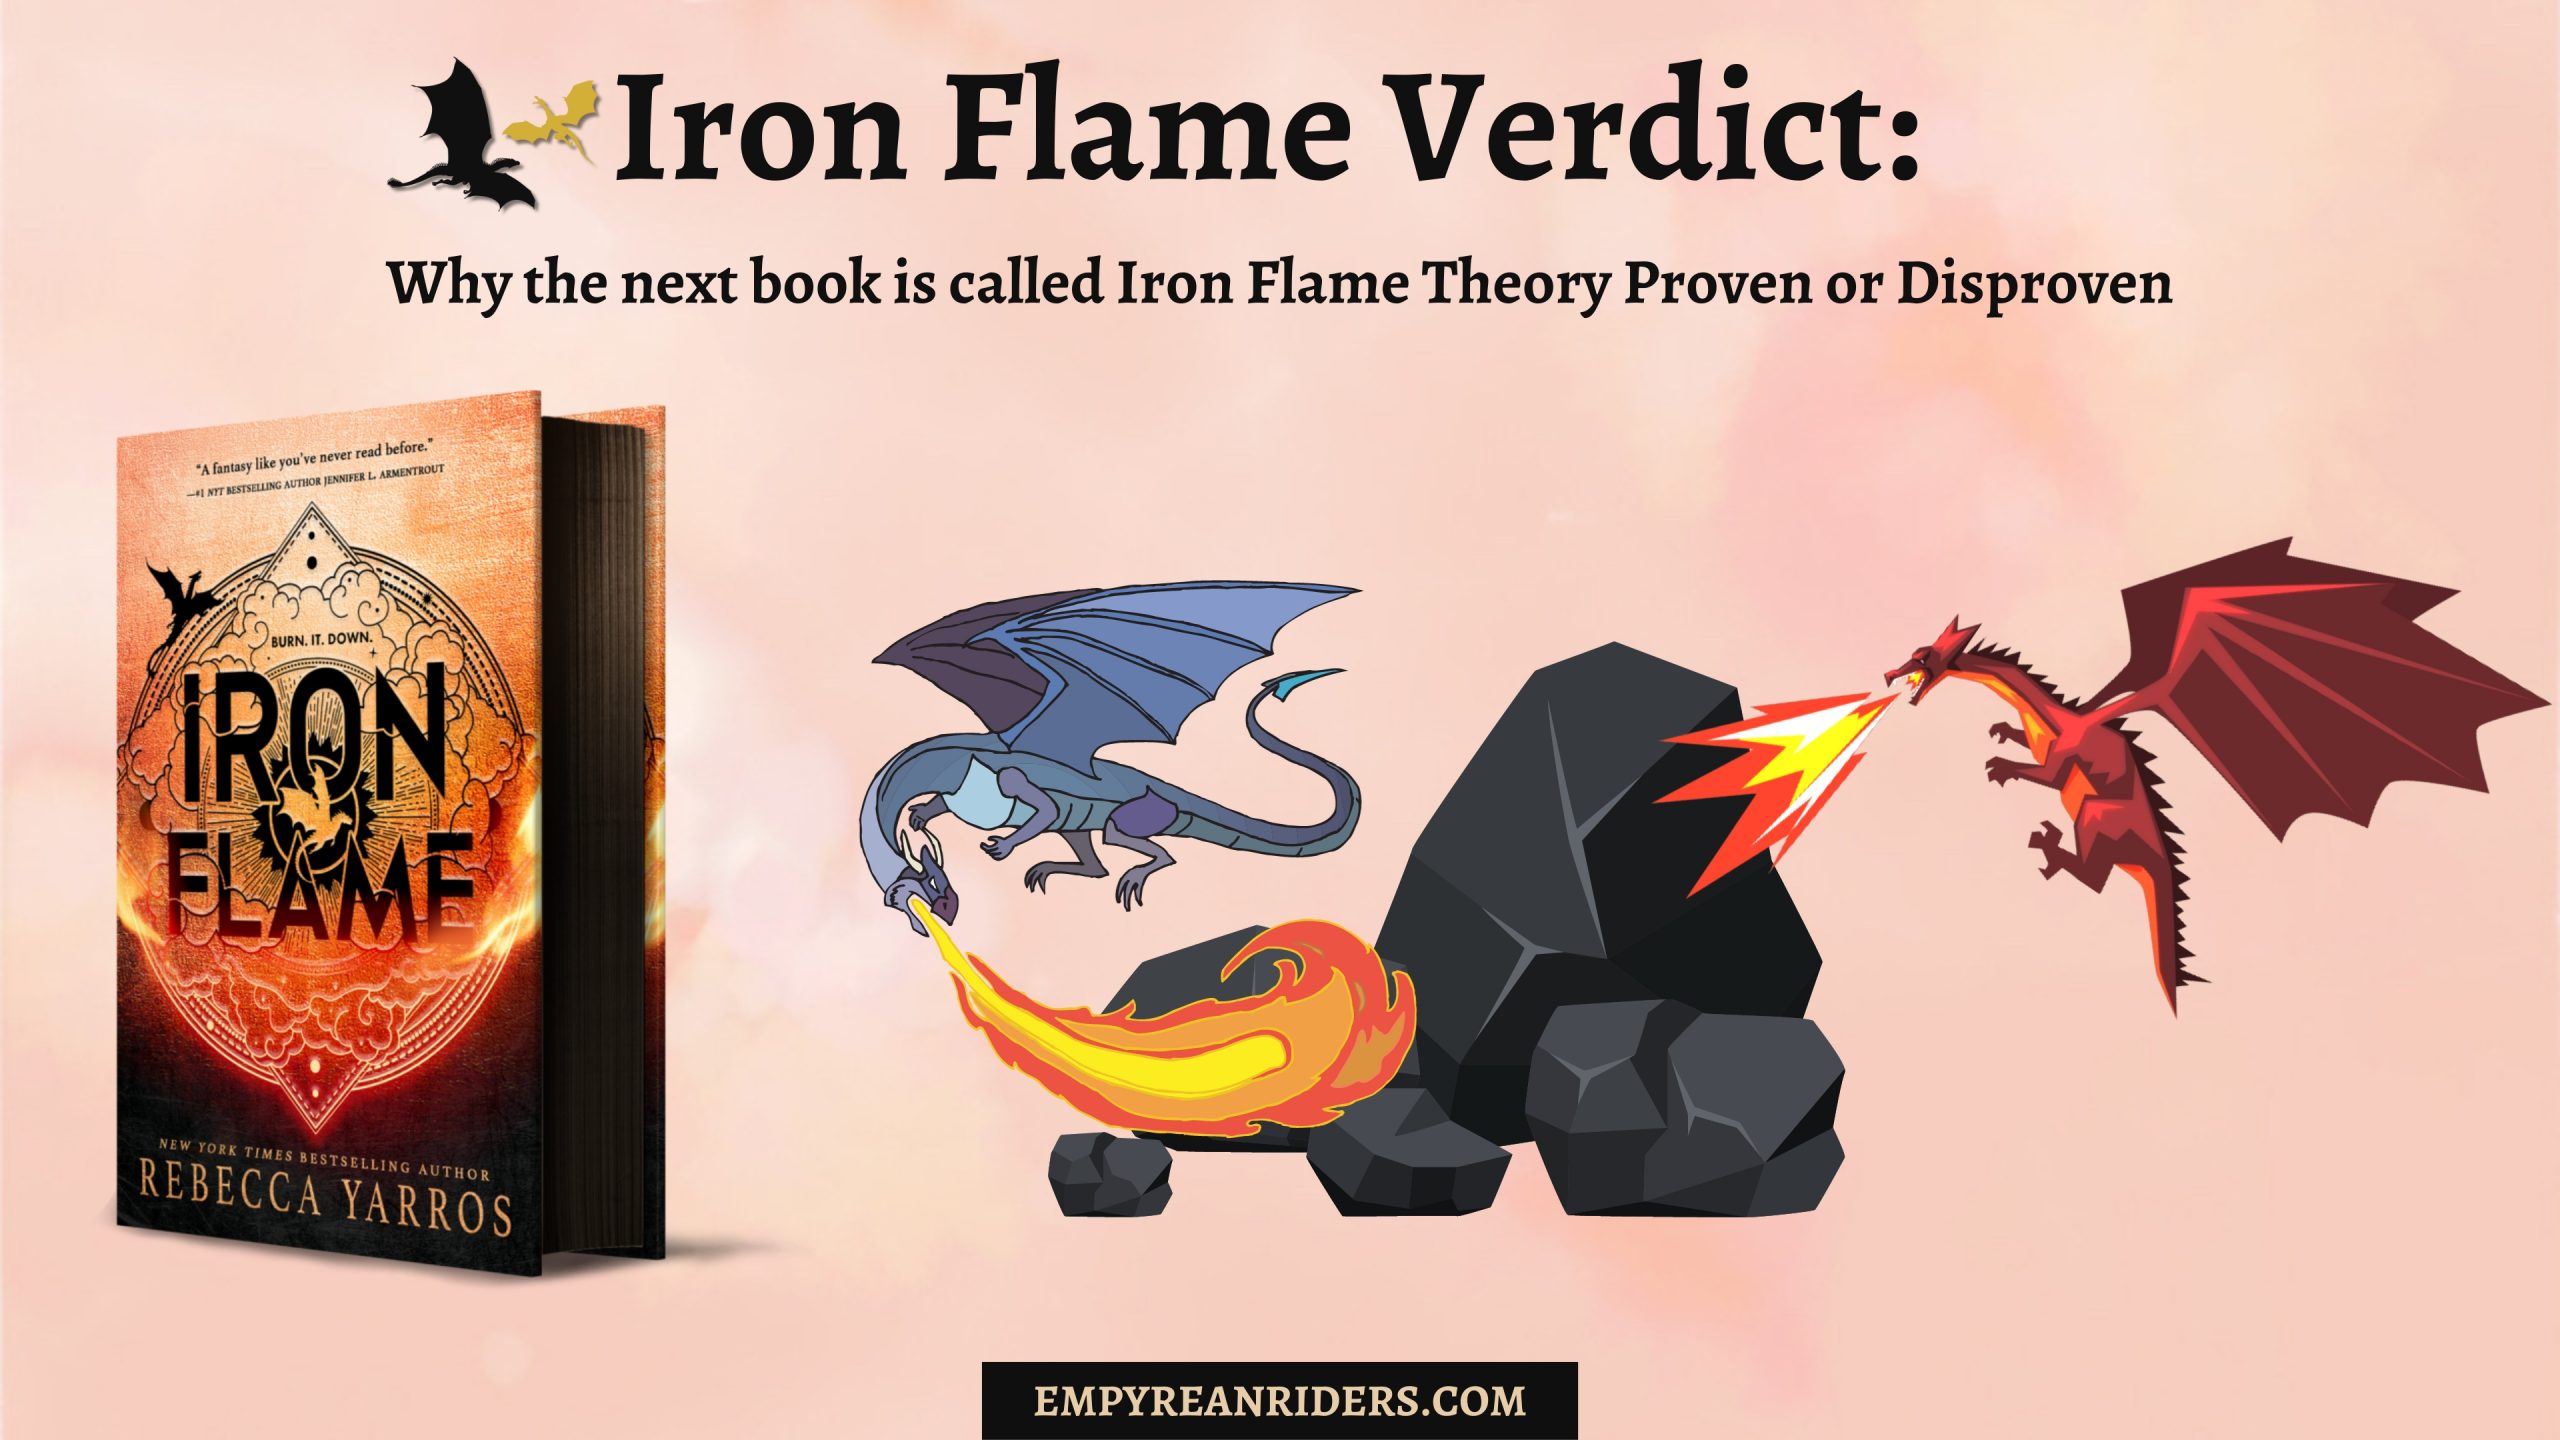 Iron Flame Verdict: Why the next book is called Iron Flame Theory Proven or Disproven